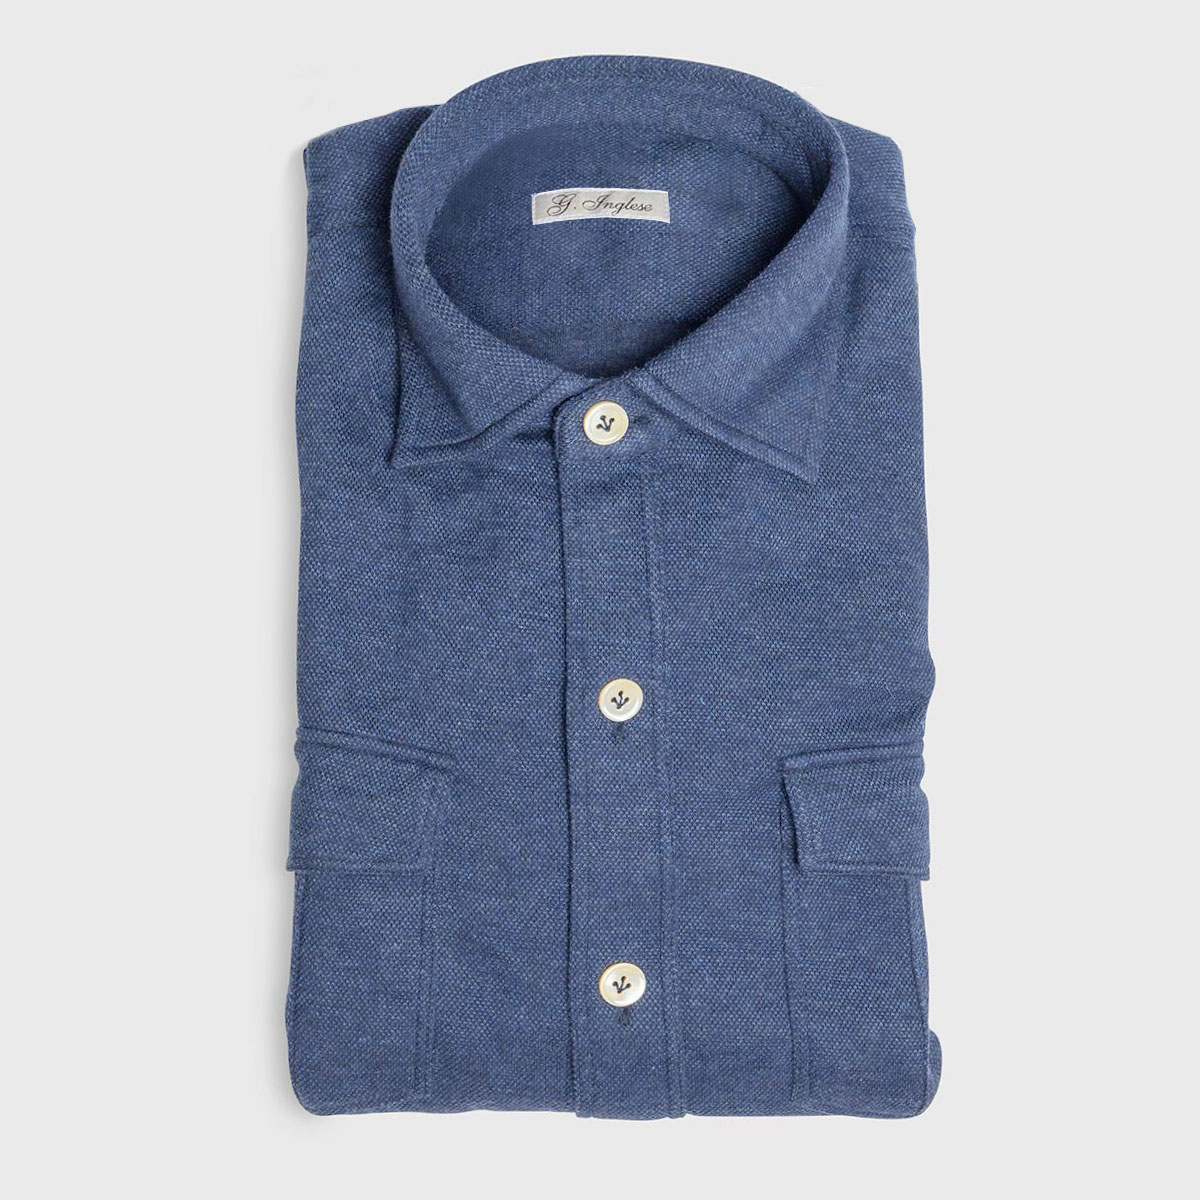 Blue Cotton And Cashmere Piquet Shirt G. Inglese on sale 2022